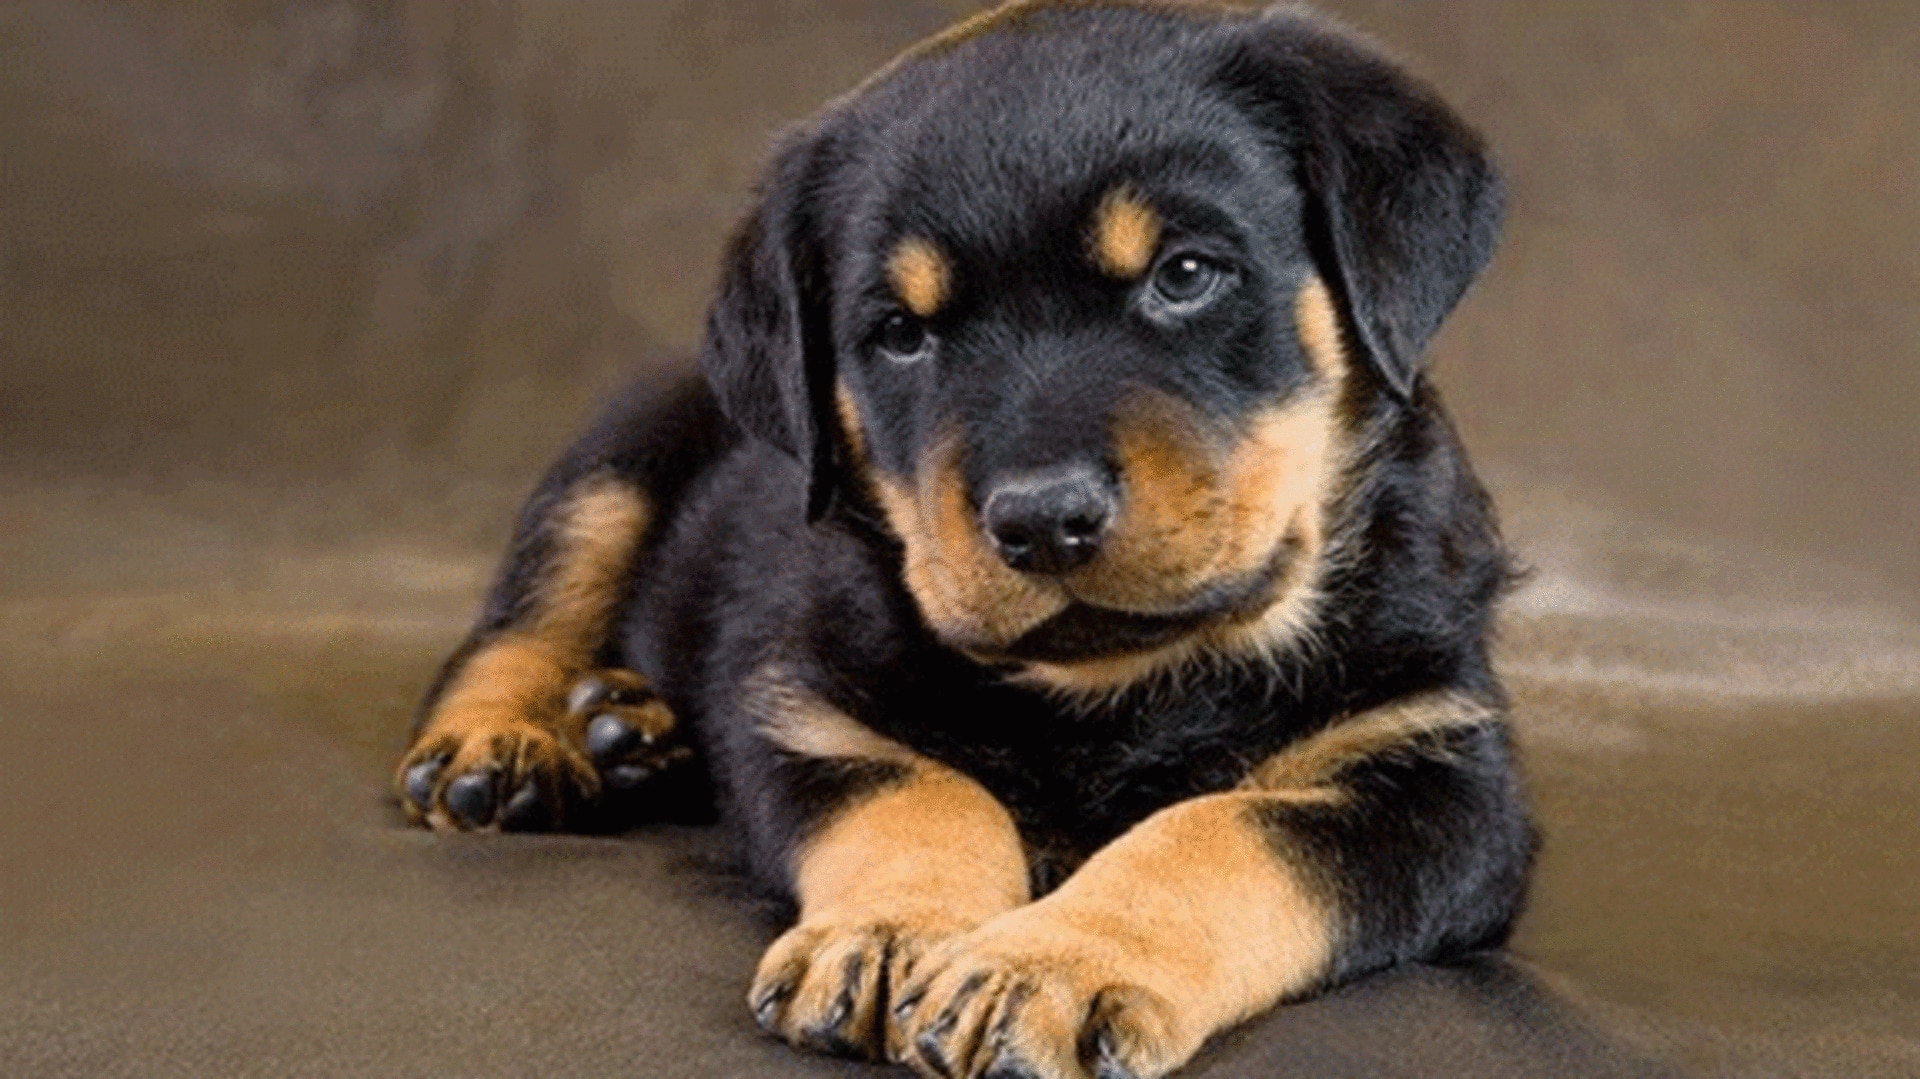 Here's how to properly train your Rottweiler puppy